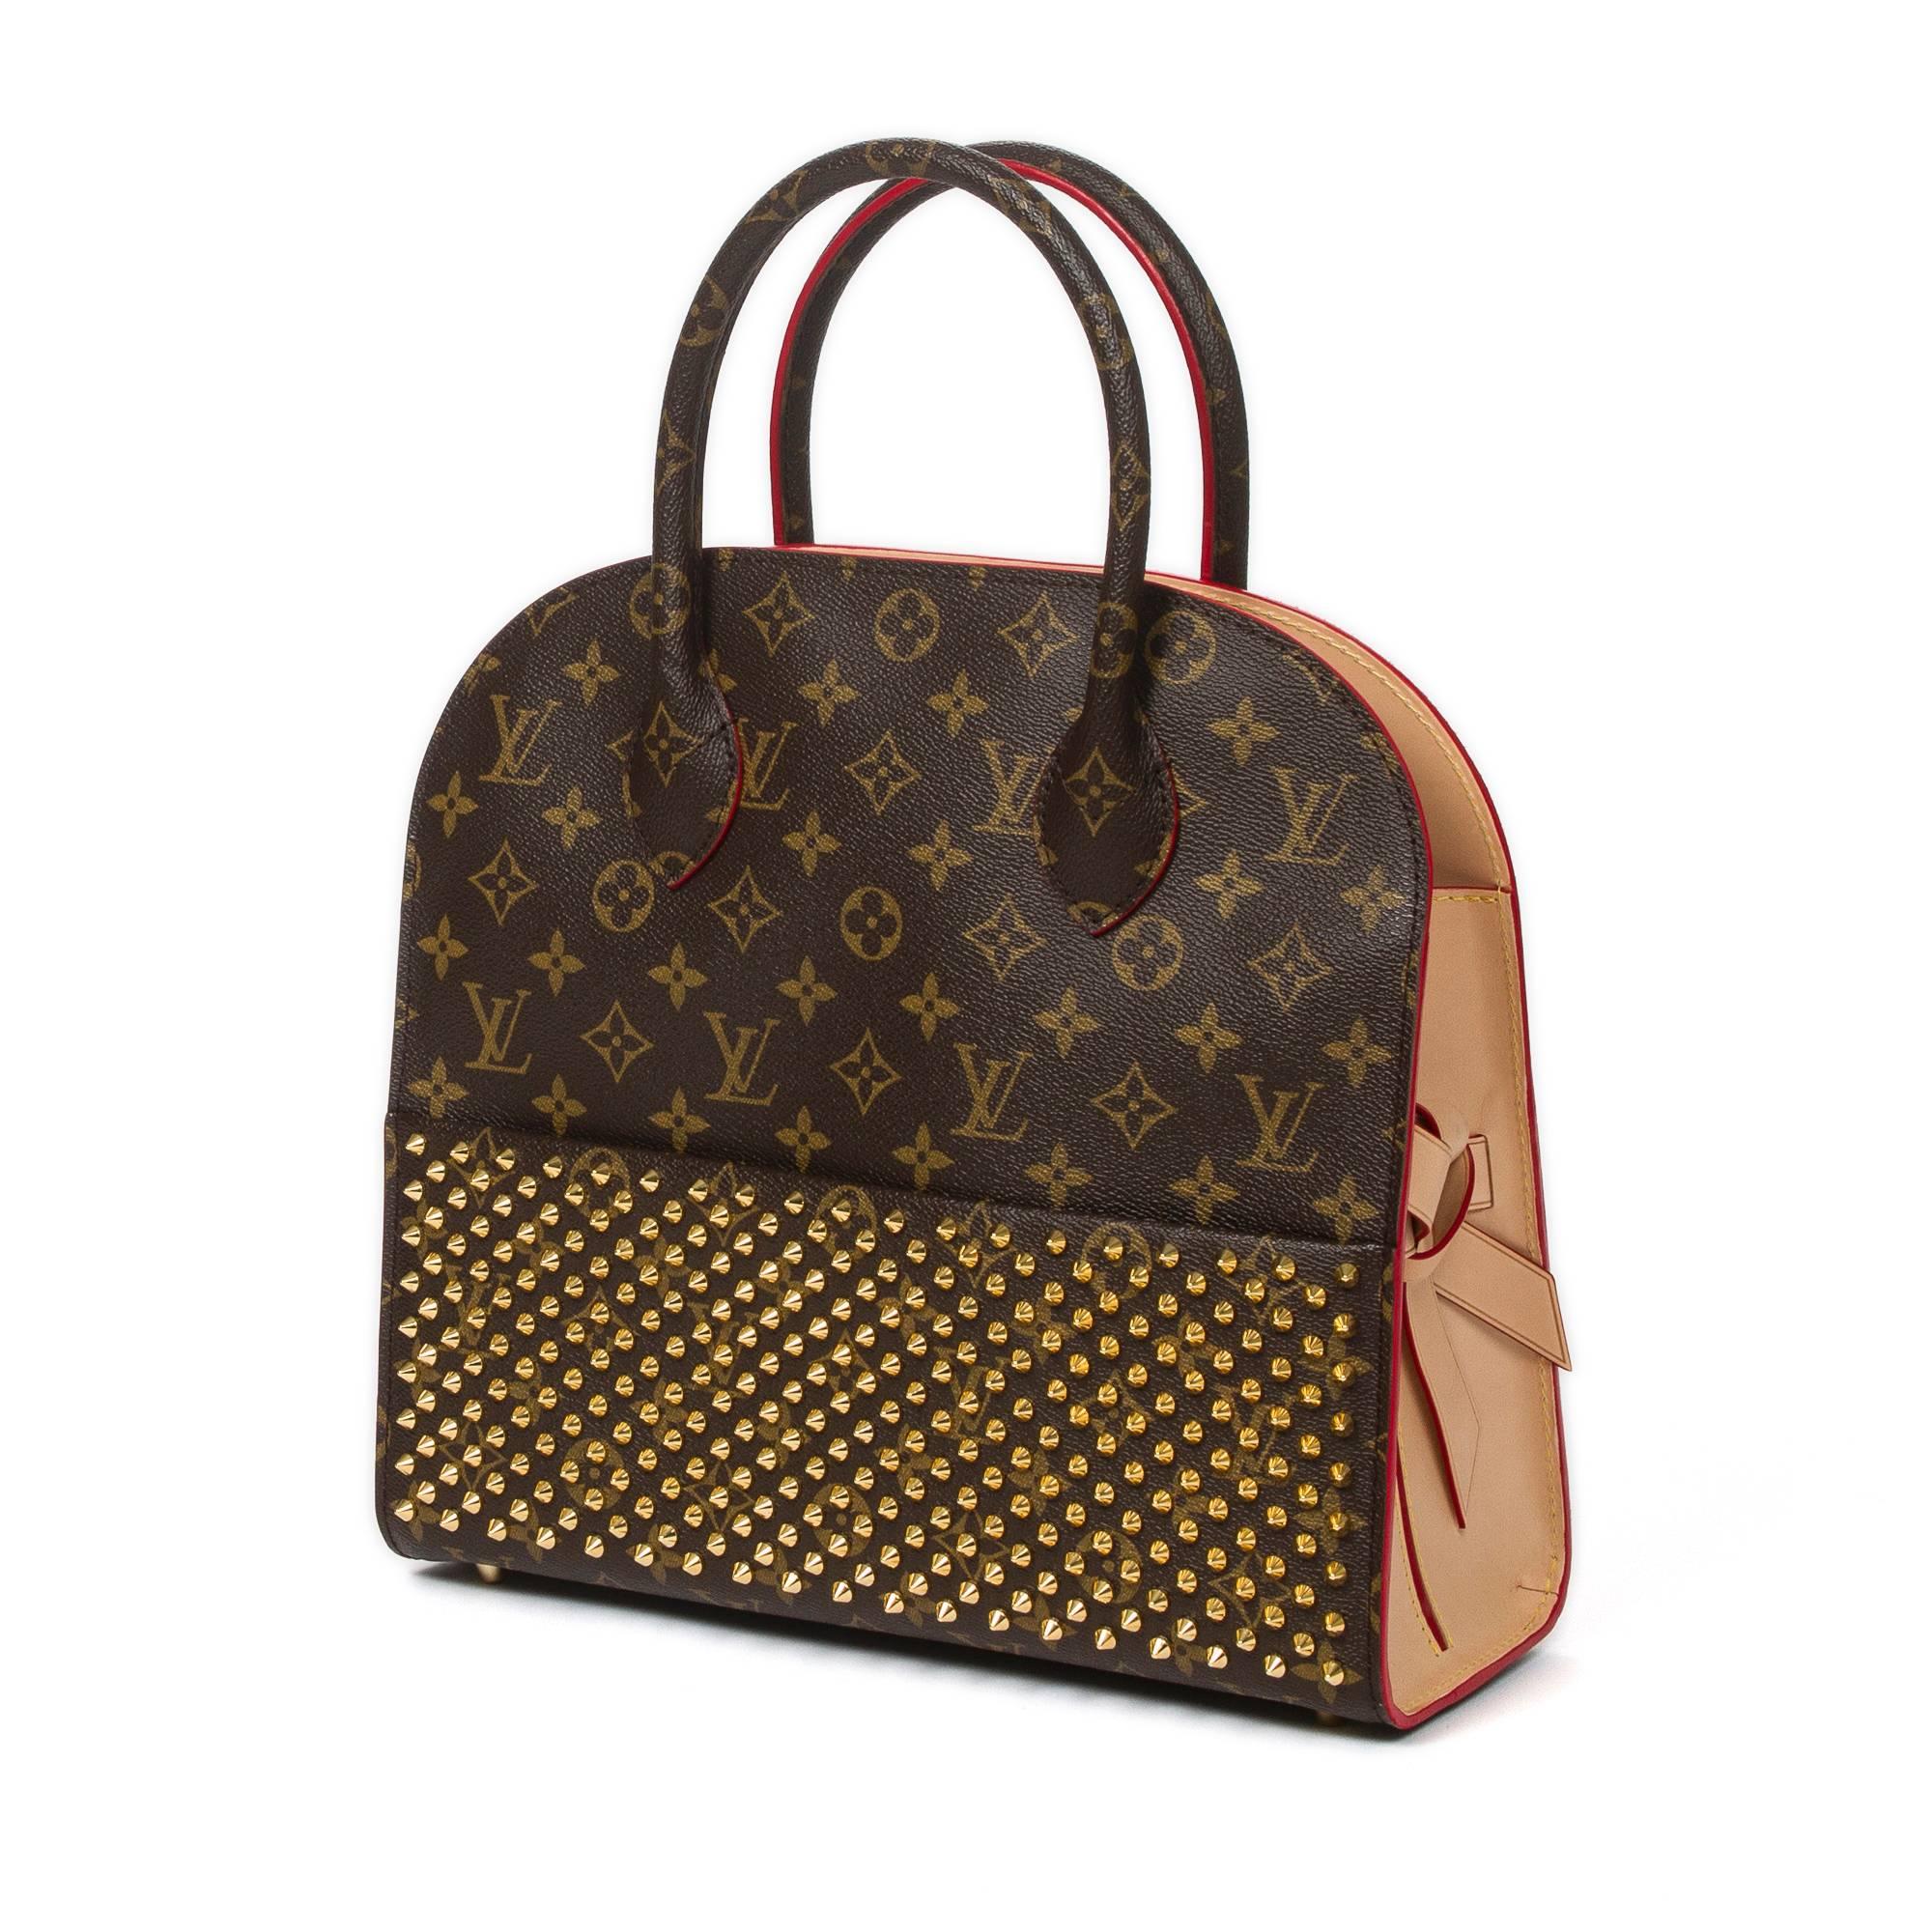 Louis Vuitton's 160th anniversary celebration Iconoclast Collection. Shopping bag by Christian Louboutin in monogram canvas with gold tone studded front slip pocket, red pony hair back side and vachetta leather sides adorned with a bow. Vachetta